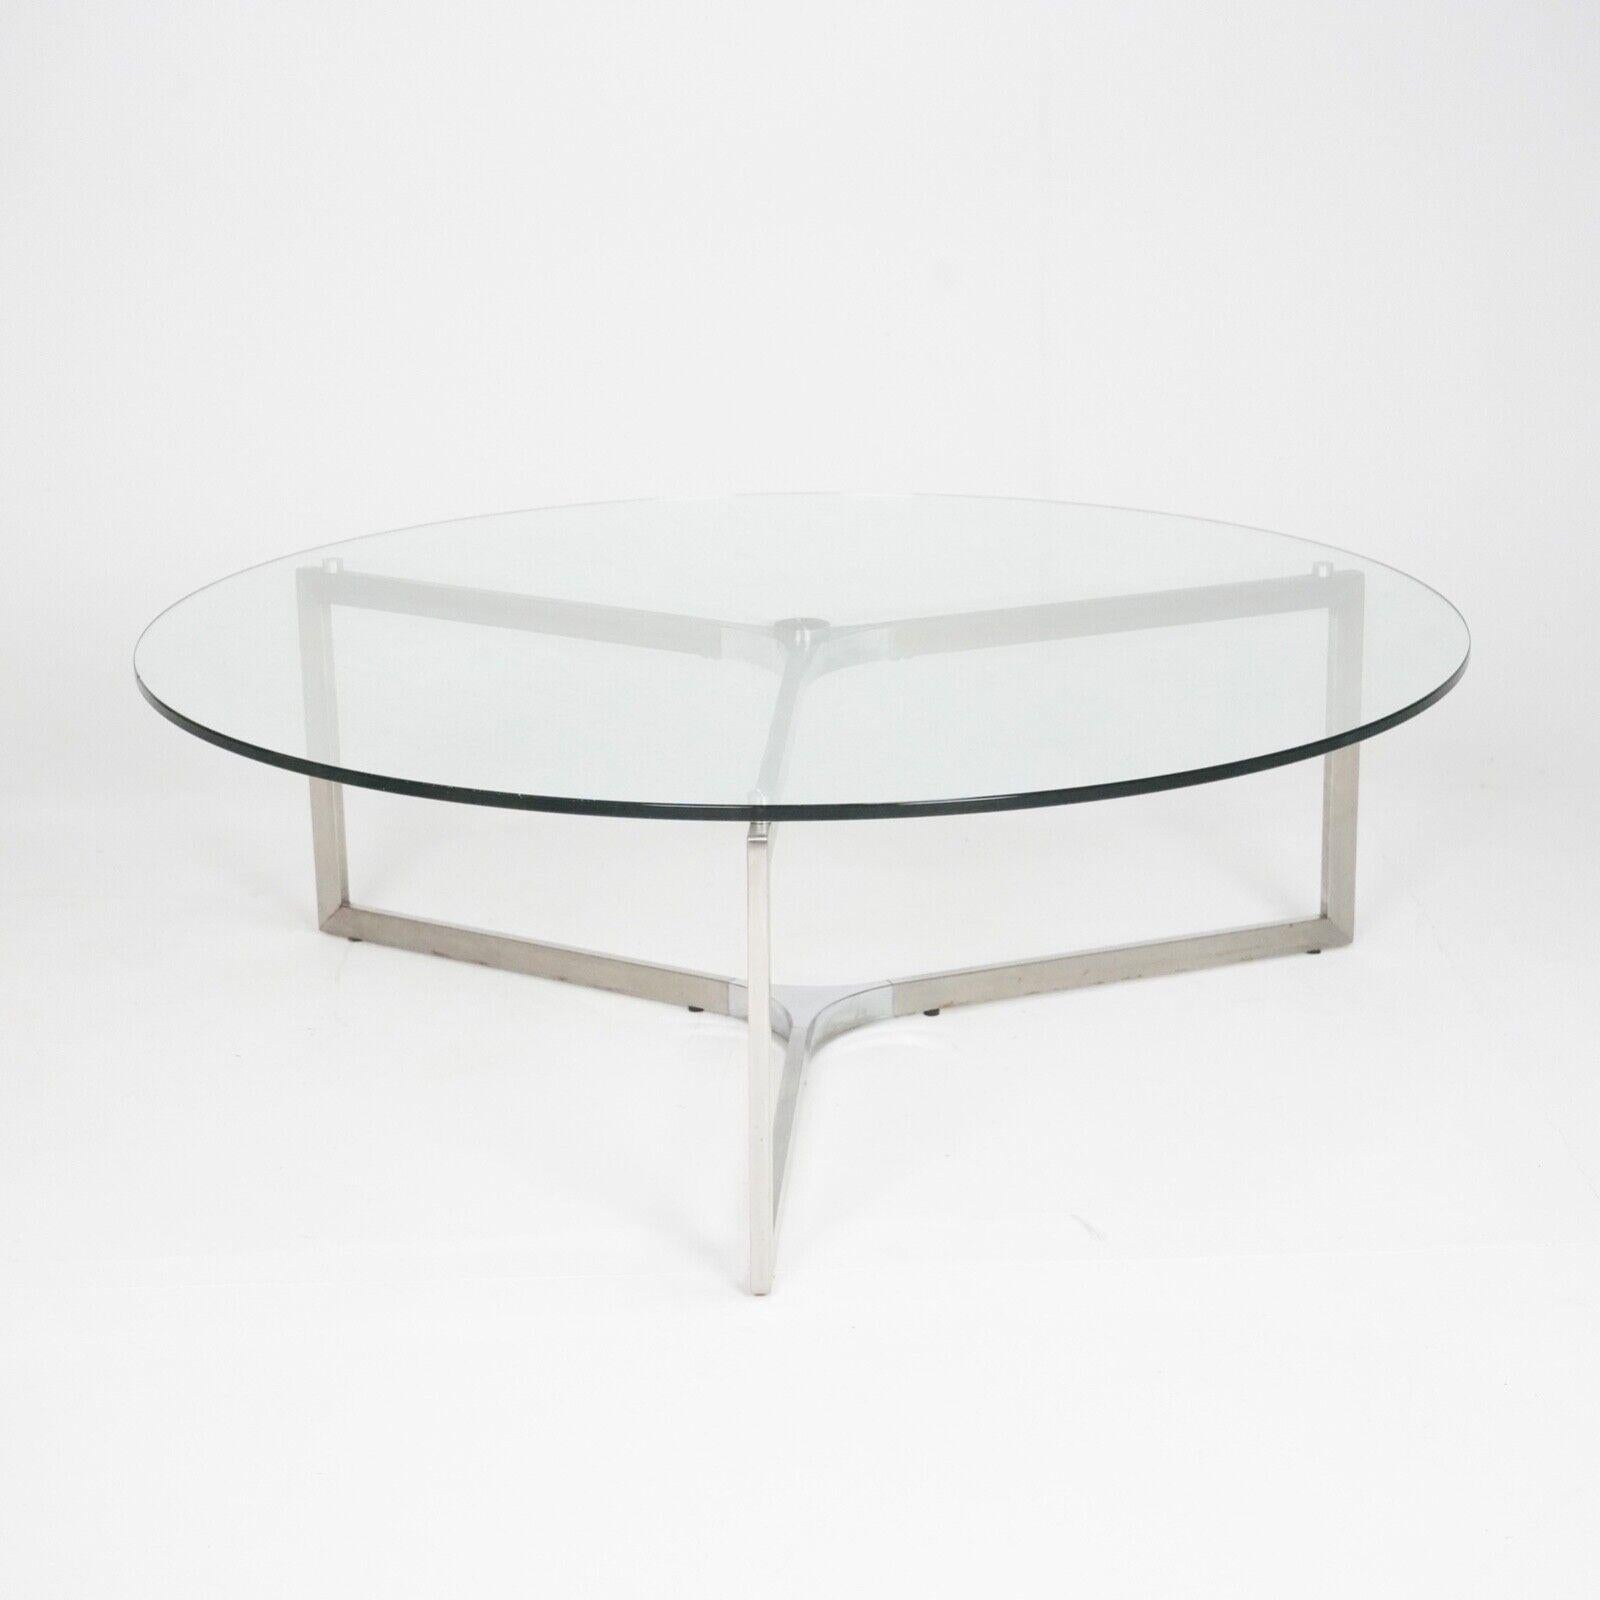 
Glass and Metal coffee table designed by Ricardo Bello Dias.
Raj is a family of coffee tables with glass top designed by the Italian-Brazilian designer Richard Bello Dias for Gallotti & Radice. They are characterised by the spectacular metal base